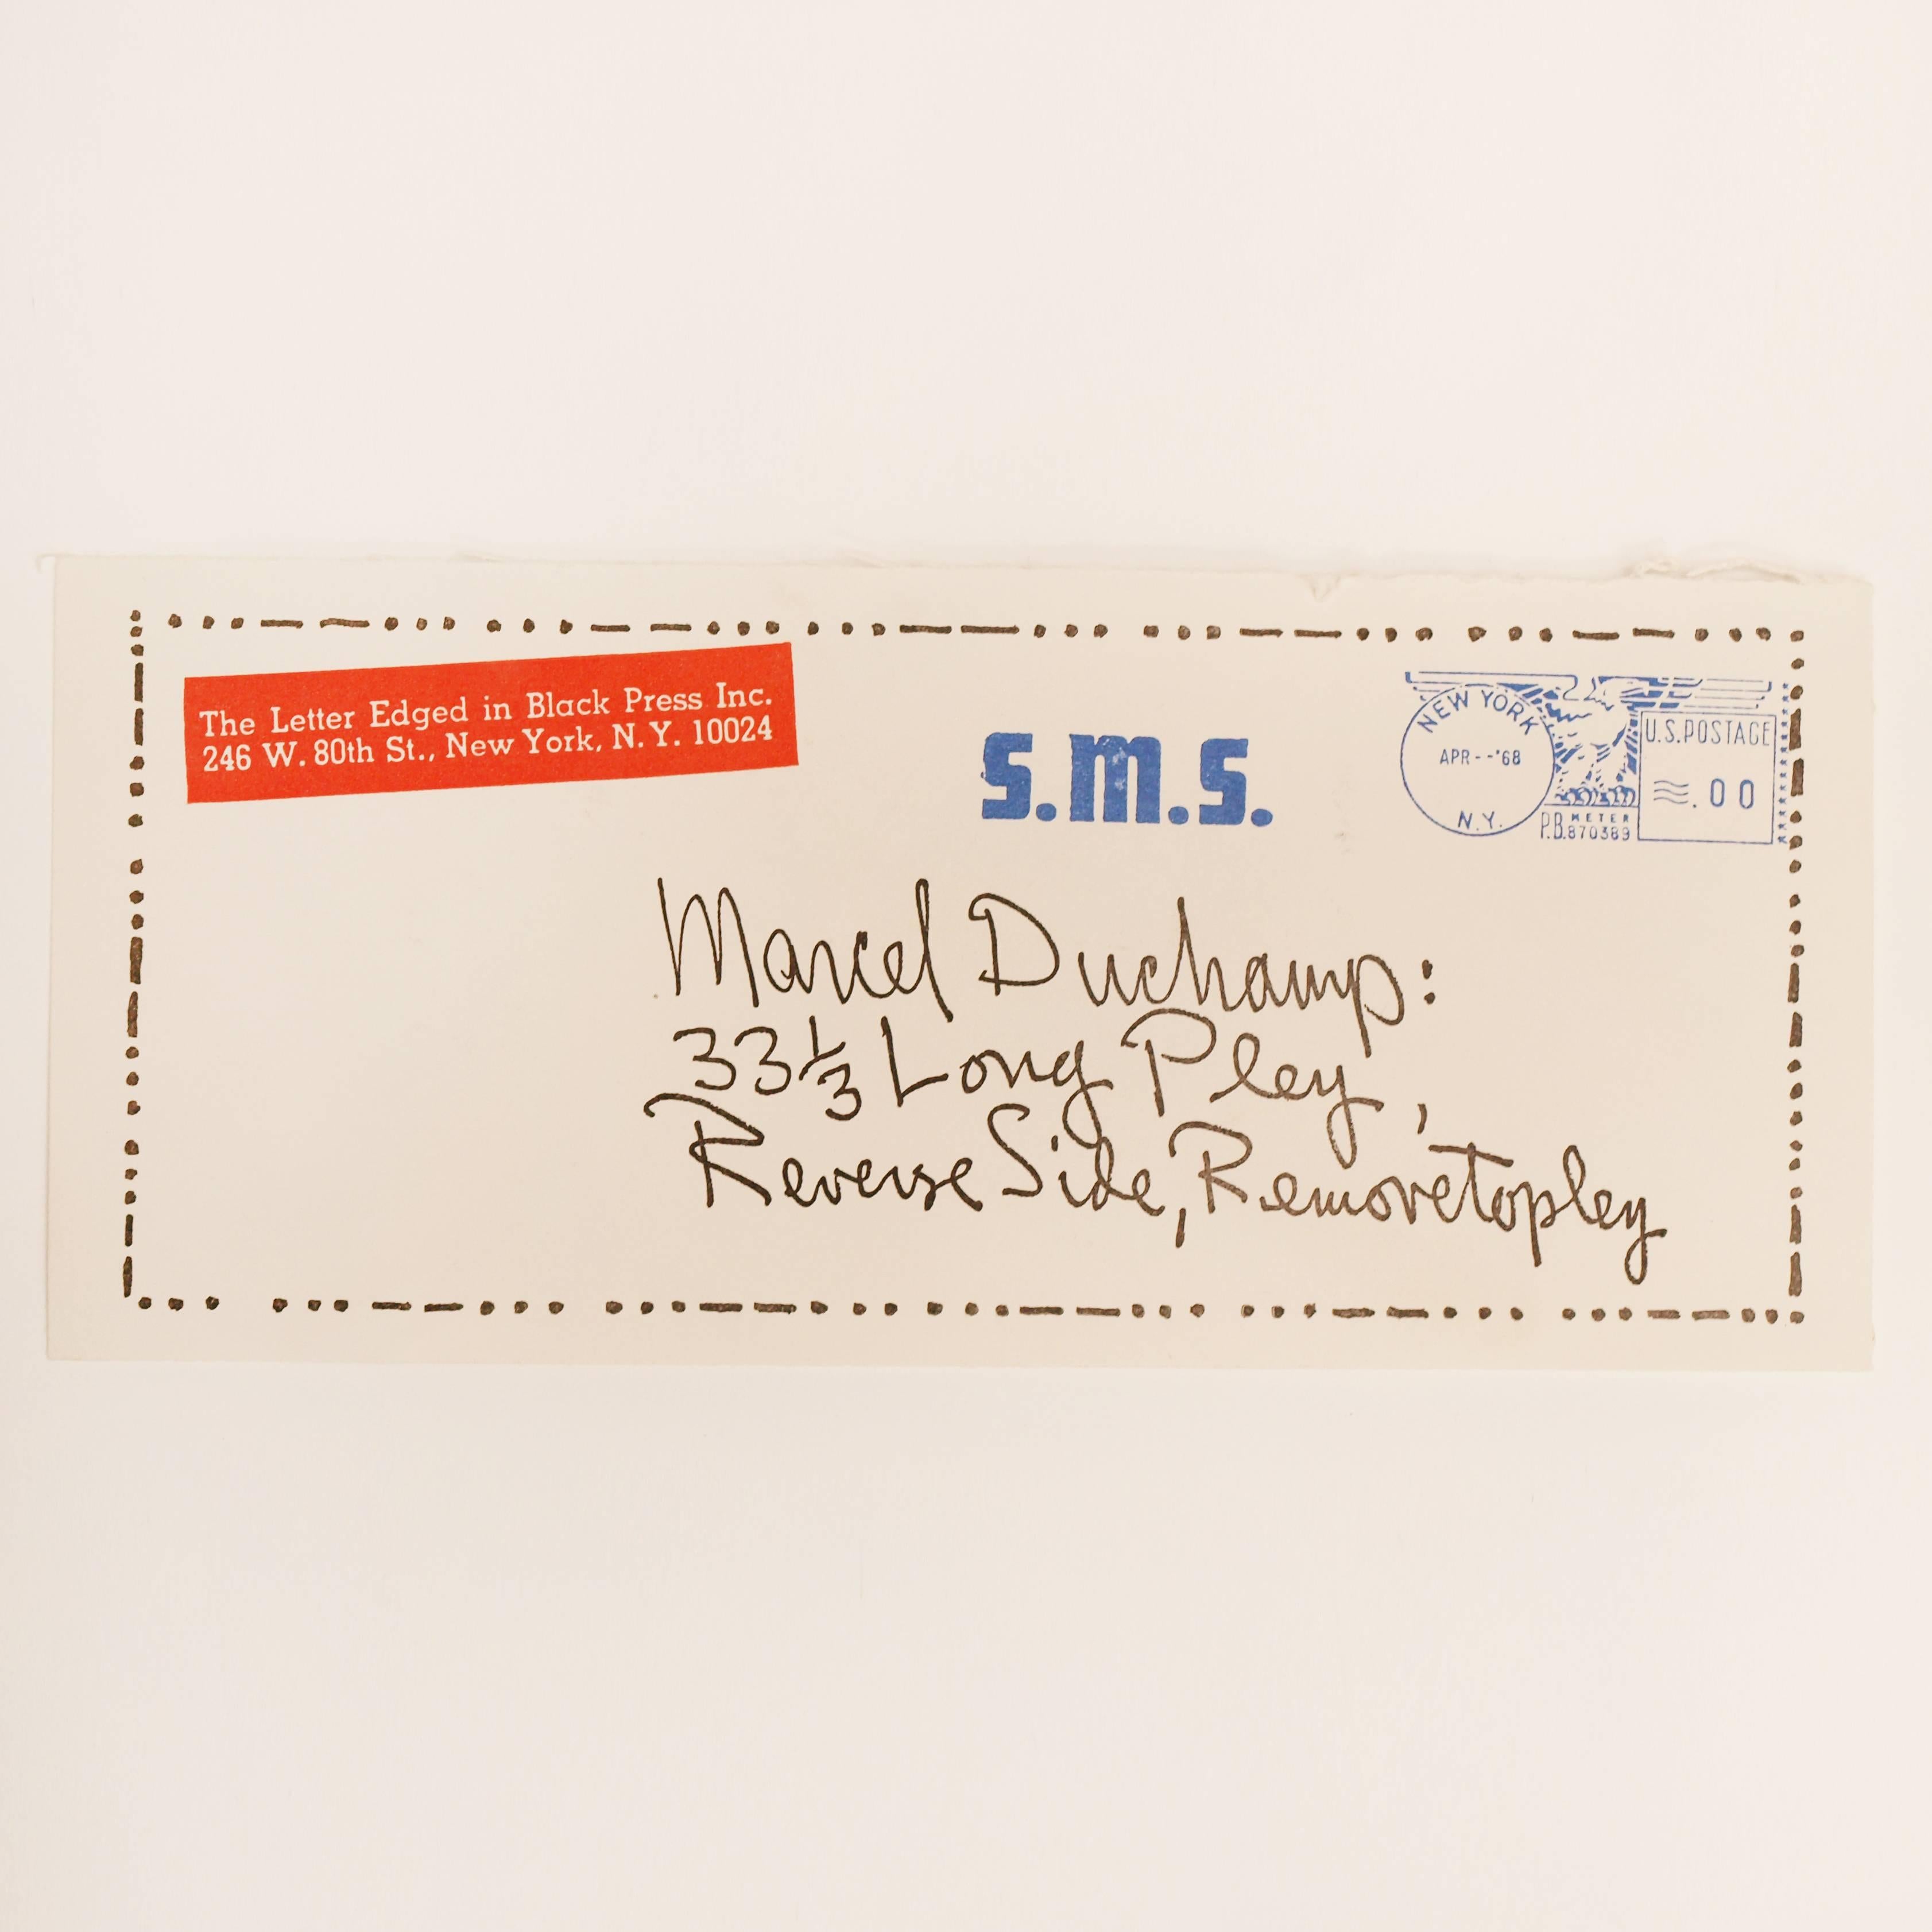 William M. Copley, Letter to Marcel Duchamp, 1968. An artwork created by William M. Copley, composed of an offset-litho printed facsimile envelope addressed to Marcel Duchamp and a wooden stick with ‘Eskimo’ printed on it. The ‘Eskimo’ is in